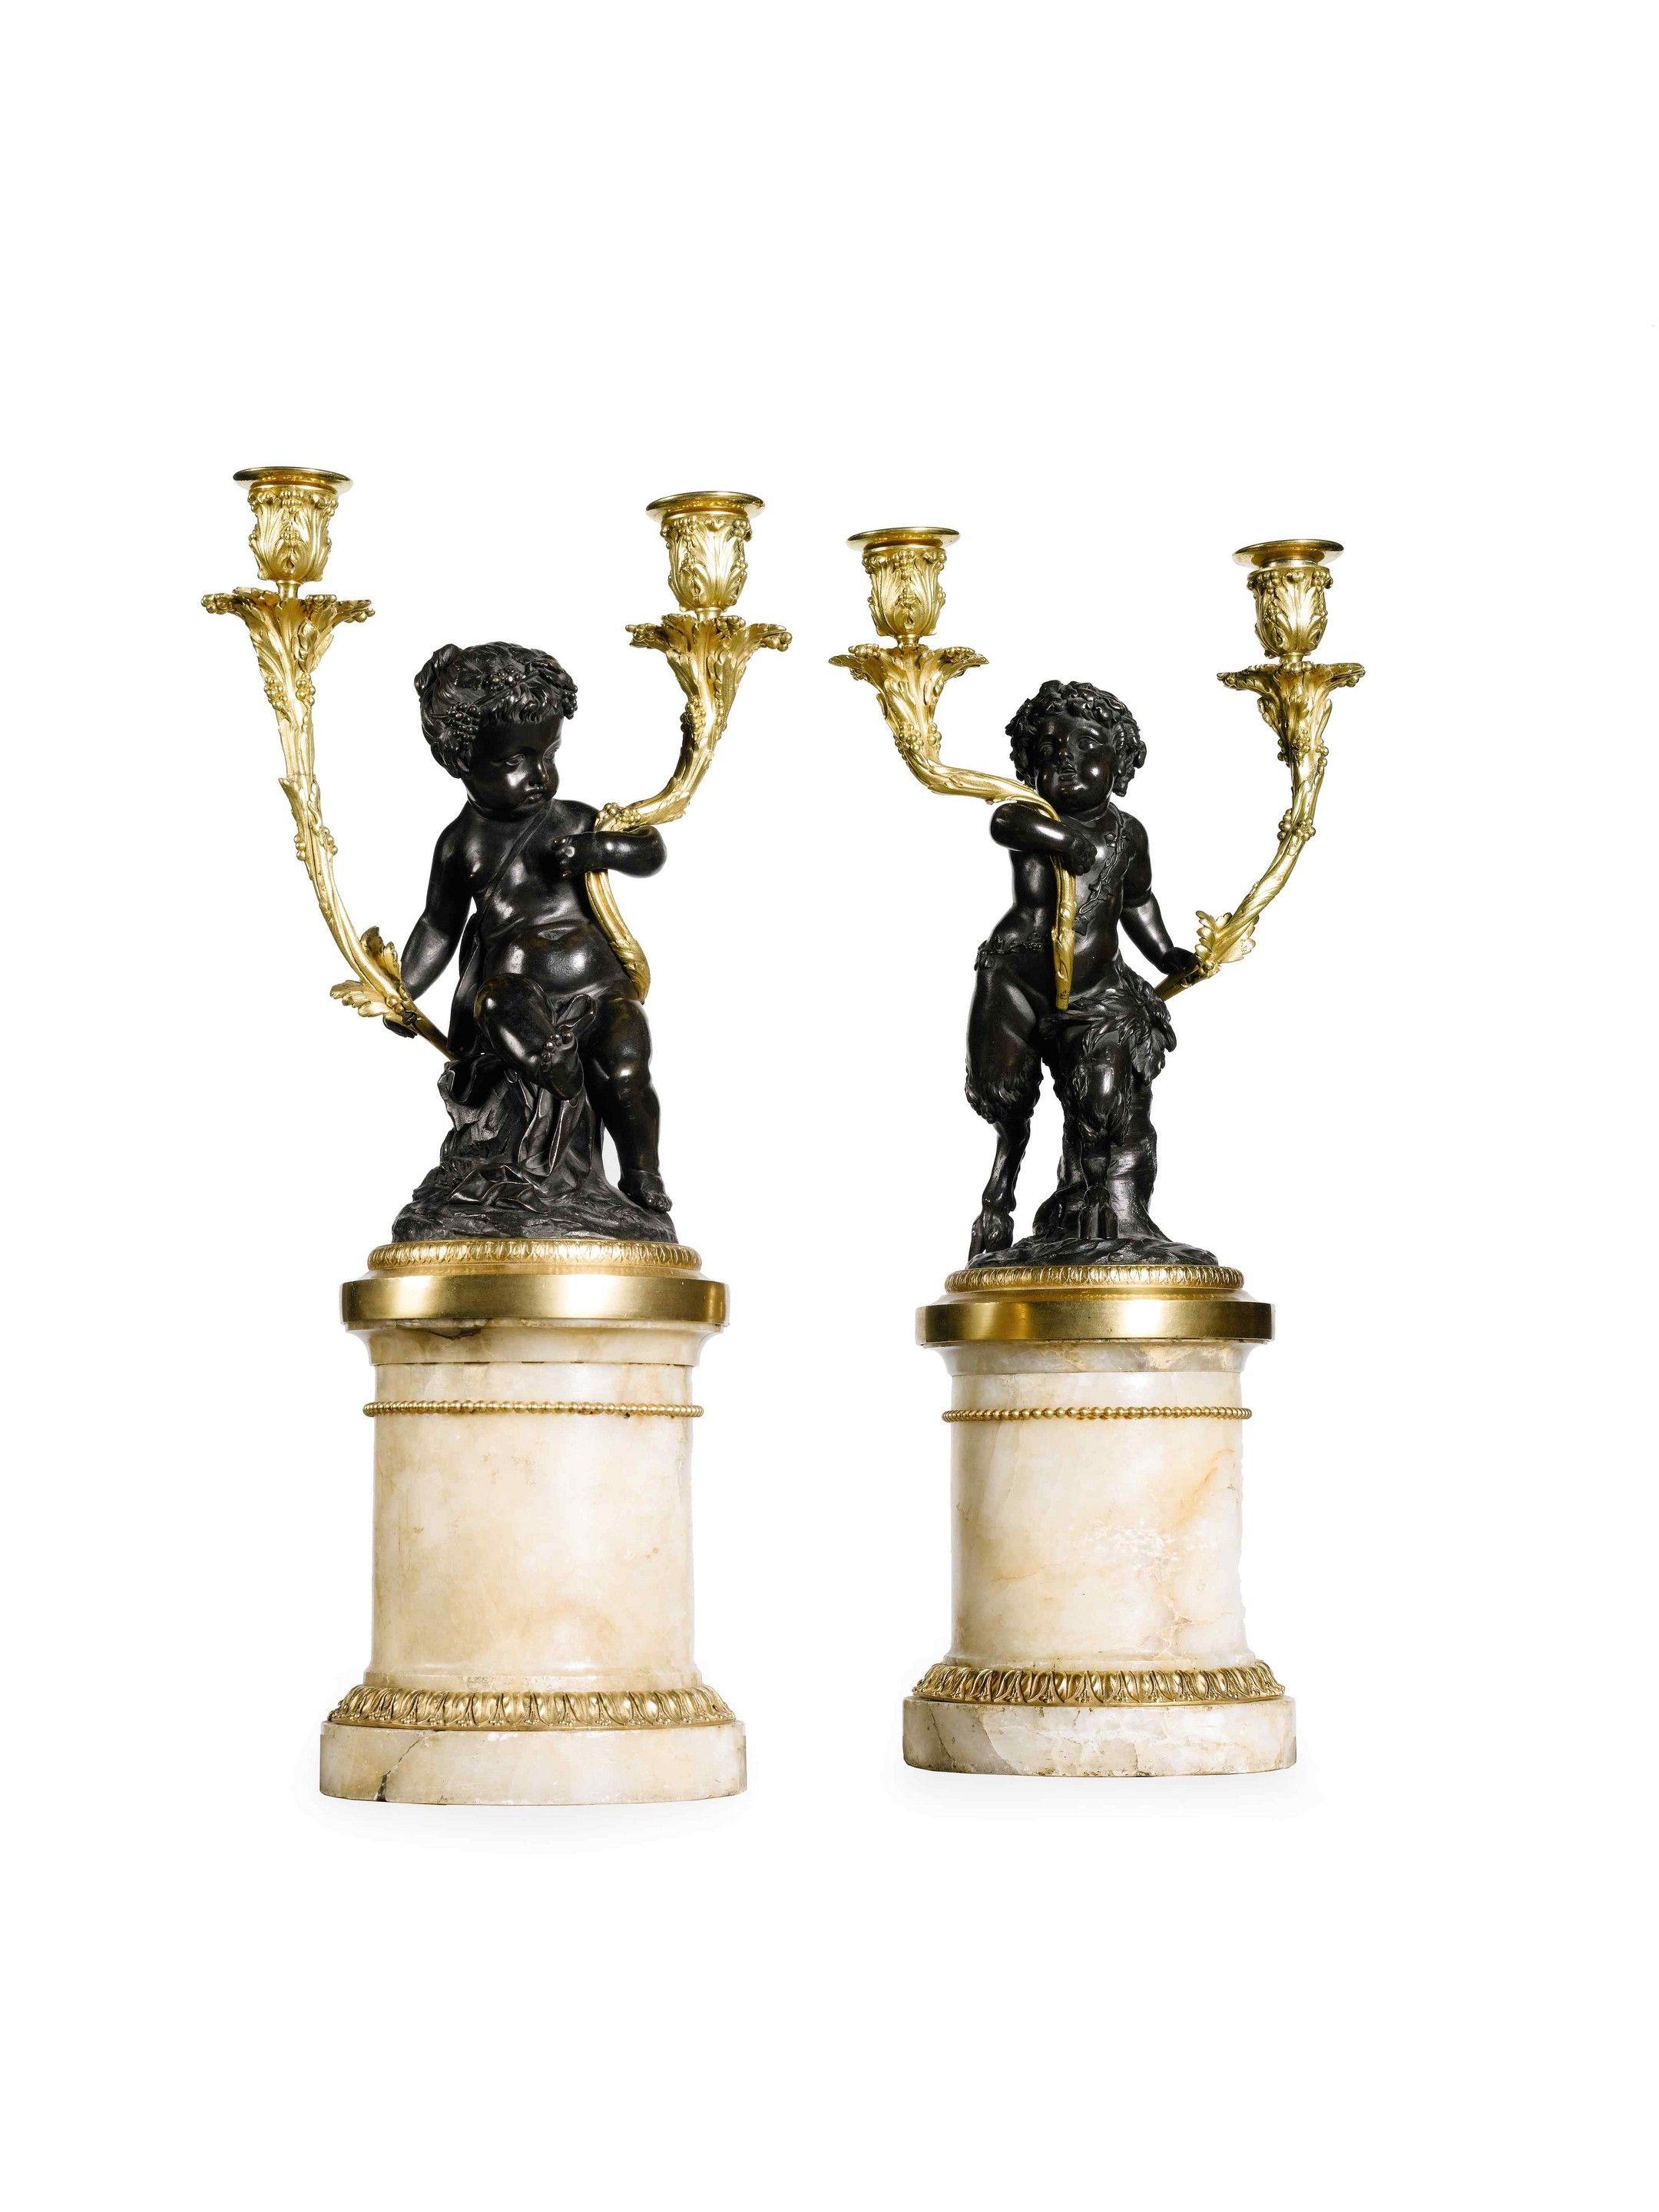 Pair of 19th Century Bronze, Ormolu and Fluorspar Candelabra In Good Condition For Sale In Lymington, Hampshire